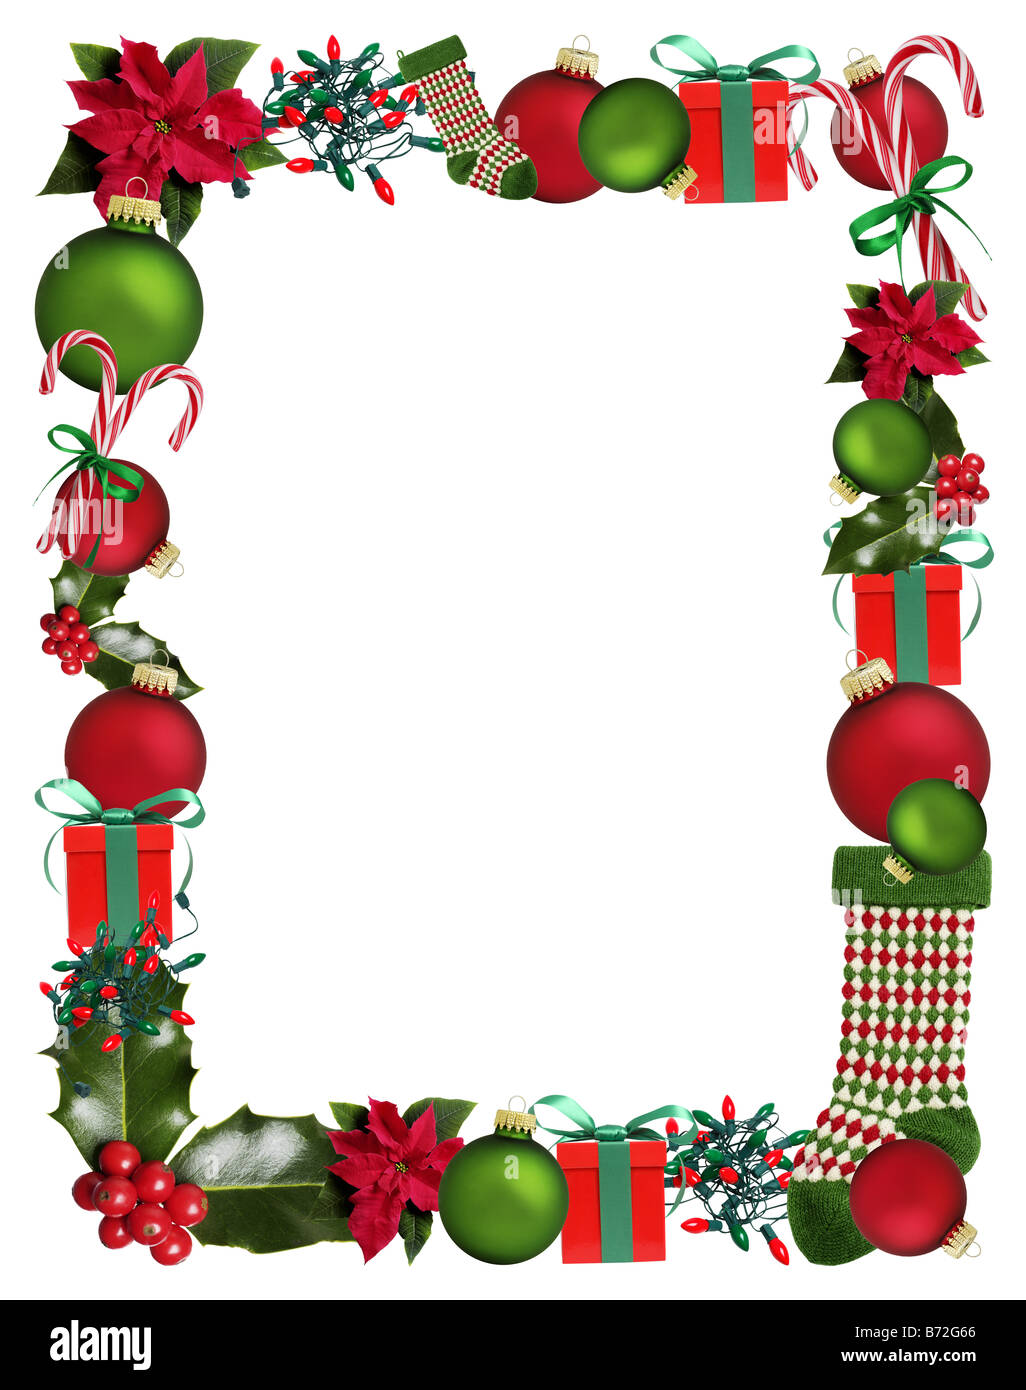 Border of Christmas and Holiday objects Stock Photo